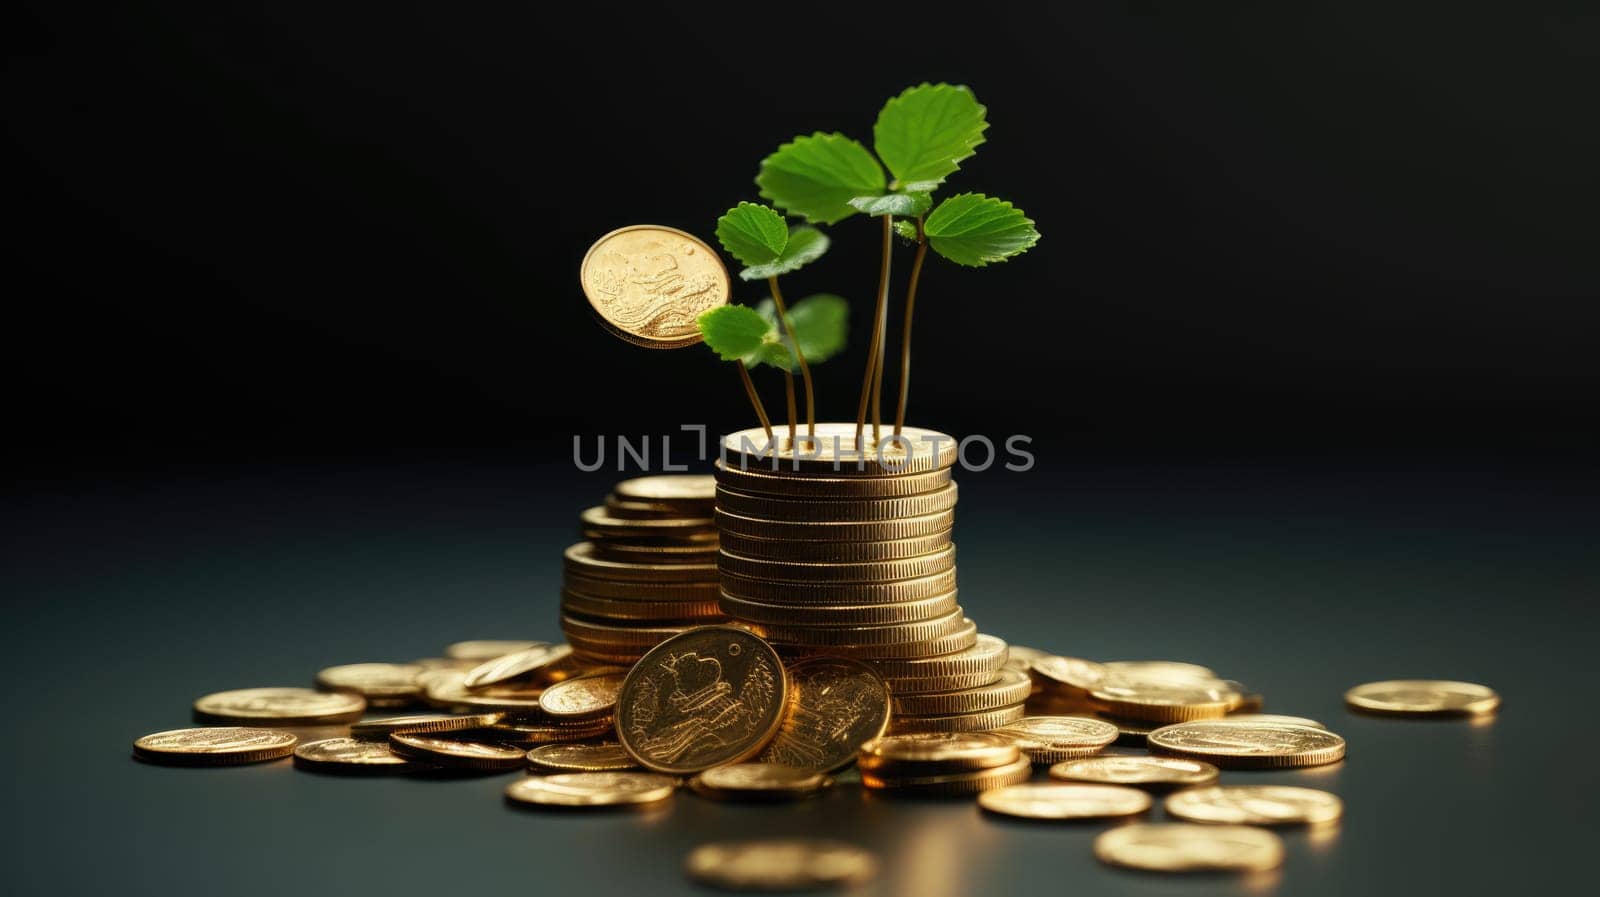 A vibrant four-leaf clover symbolizes good fortune on top of stack of gold coins. The coins encircle the clover, enhancing its charm against a dramatic black backdrop, evoking luck and prosperity.